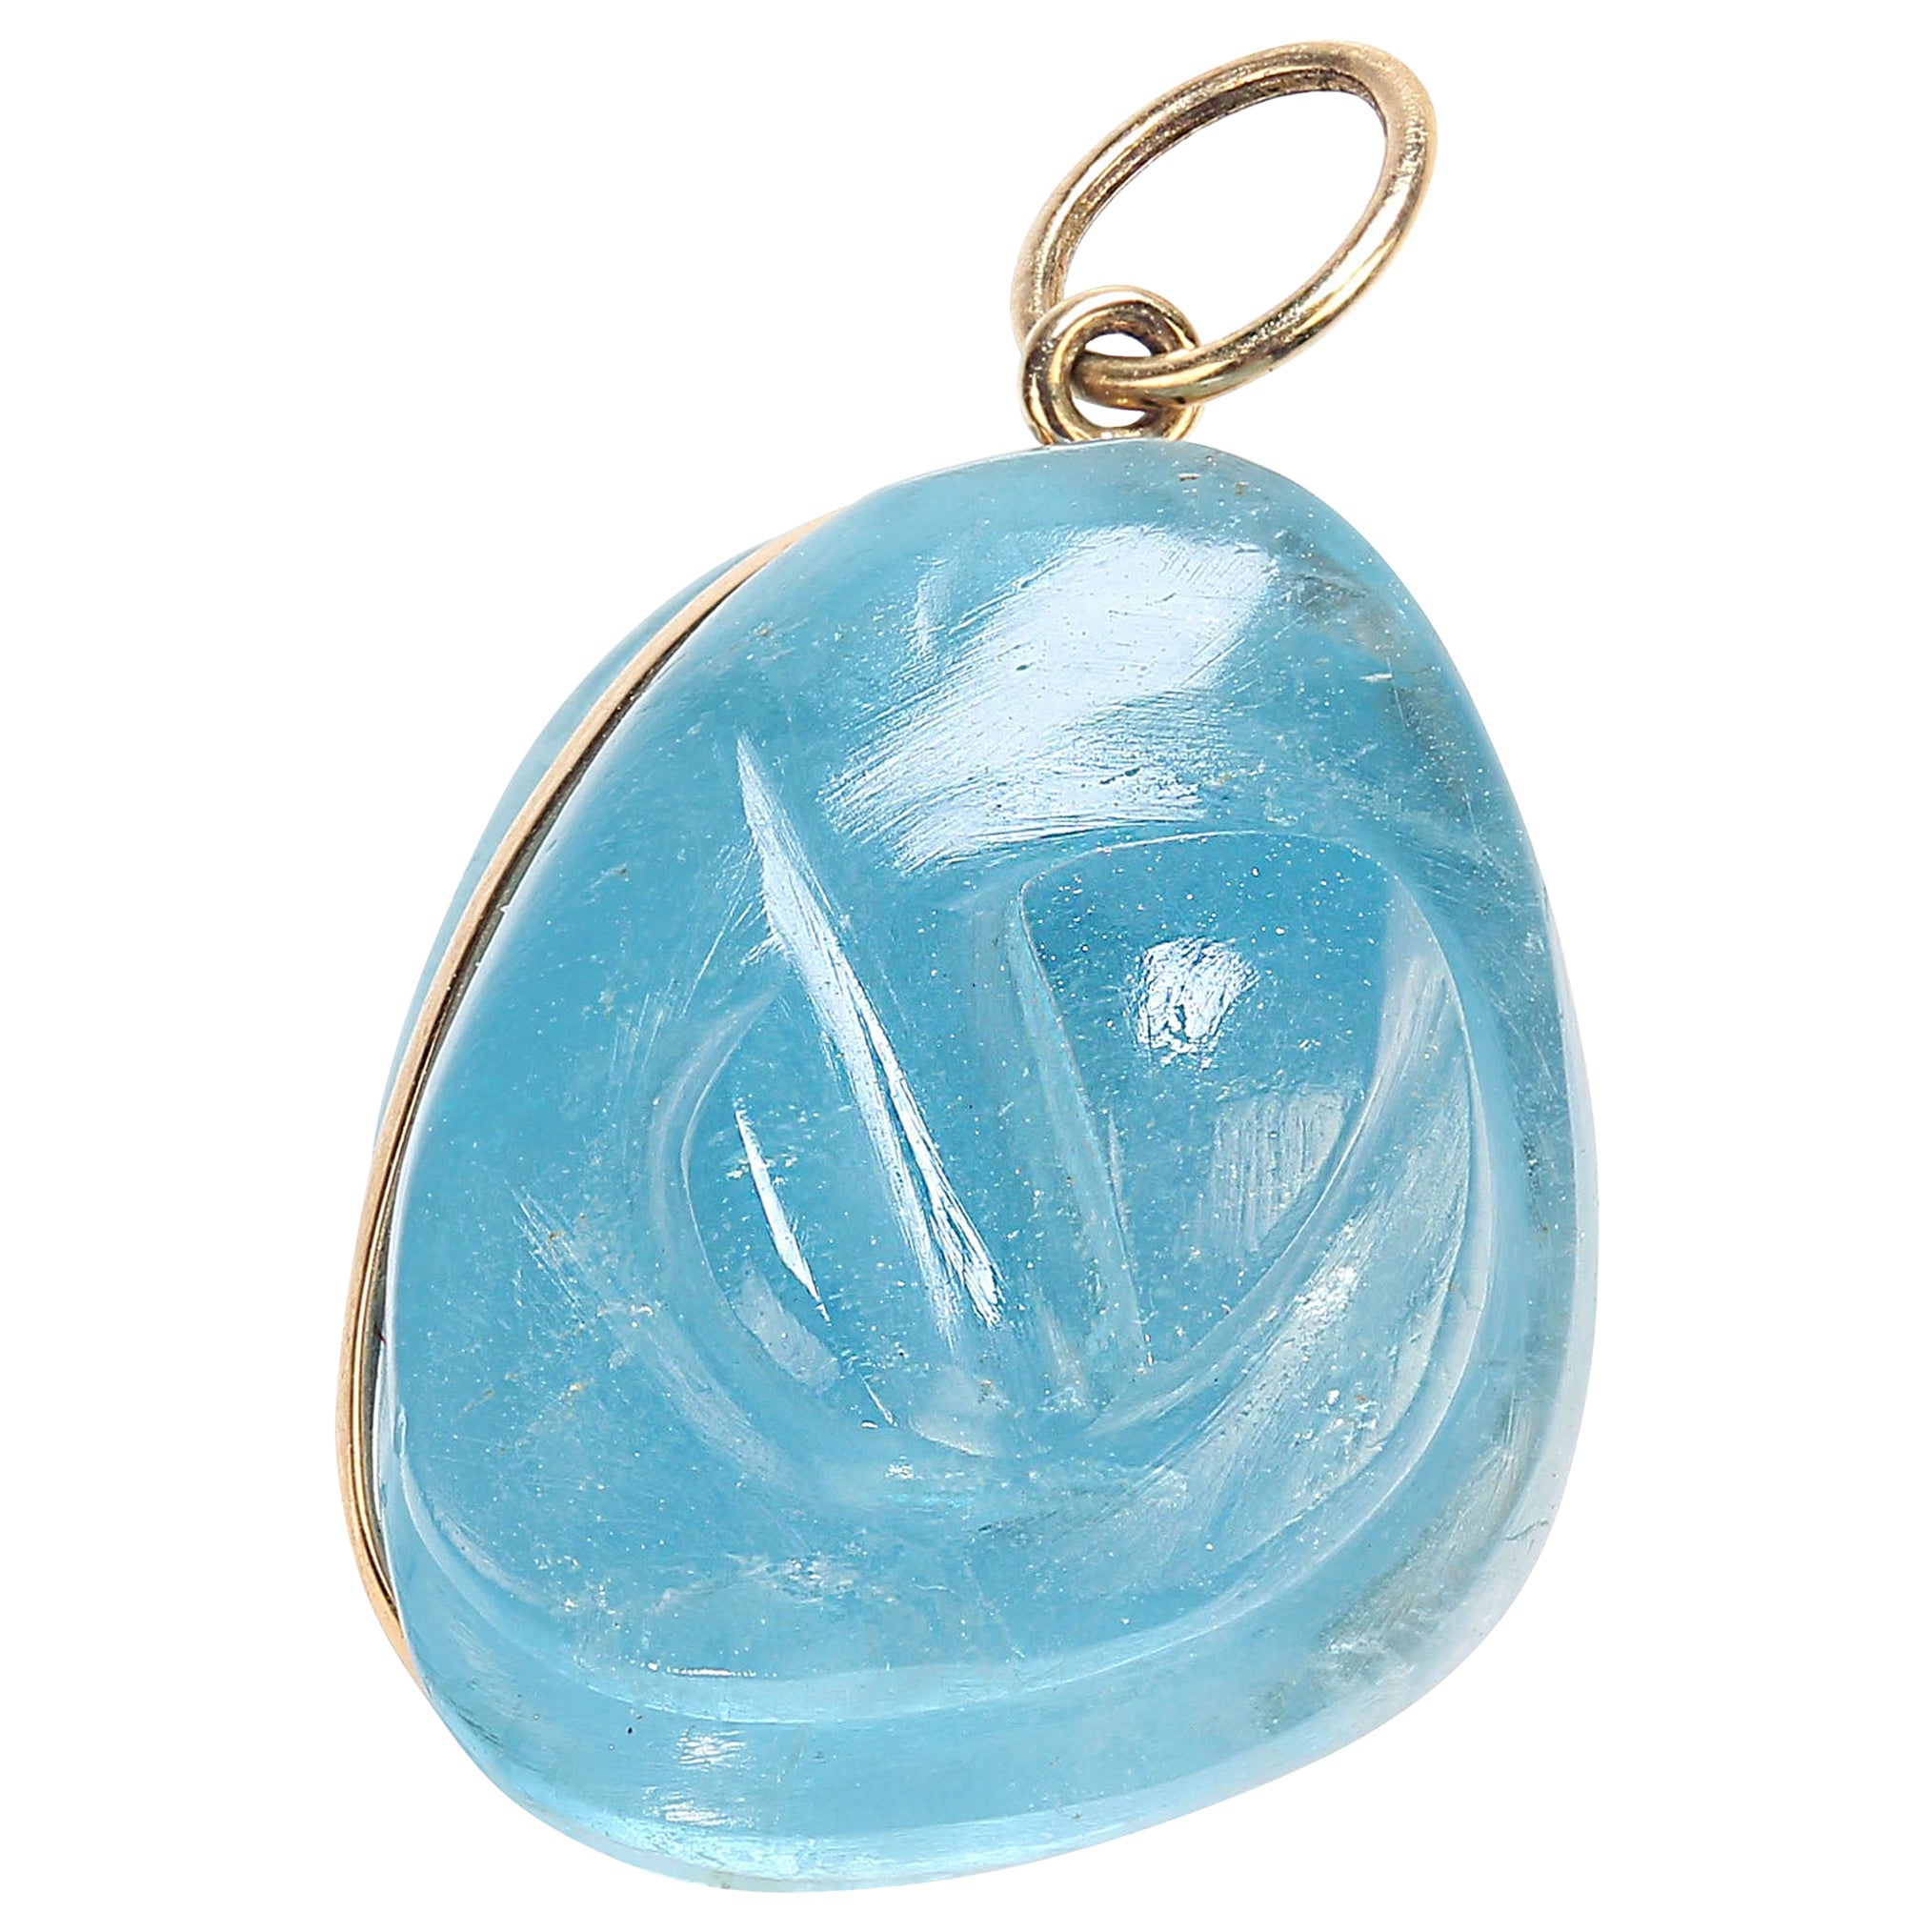 What a find!  This gorgeous Brazilian aquamarine is an intense blue.  What a joy to put on and wear every day. The translucent deep blue is so beautiful.  The gemstone measures approximately 18x15MM and is circled with a gold wire.   It comes on